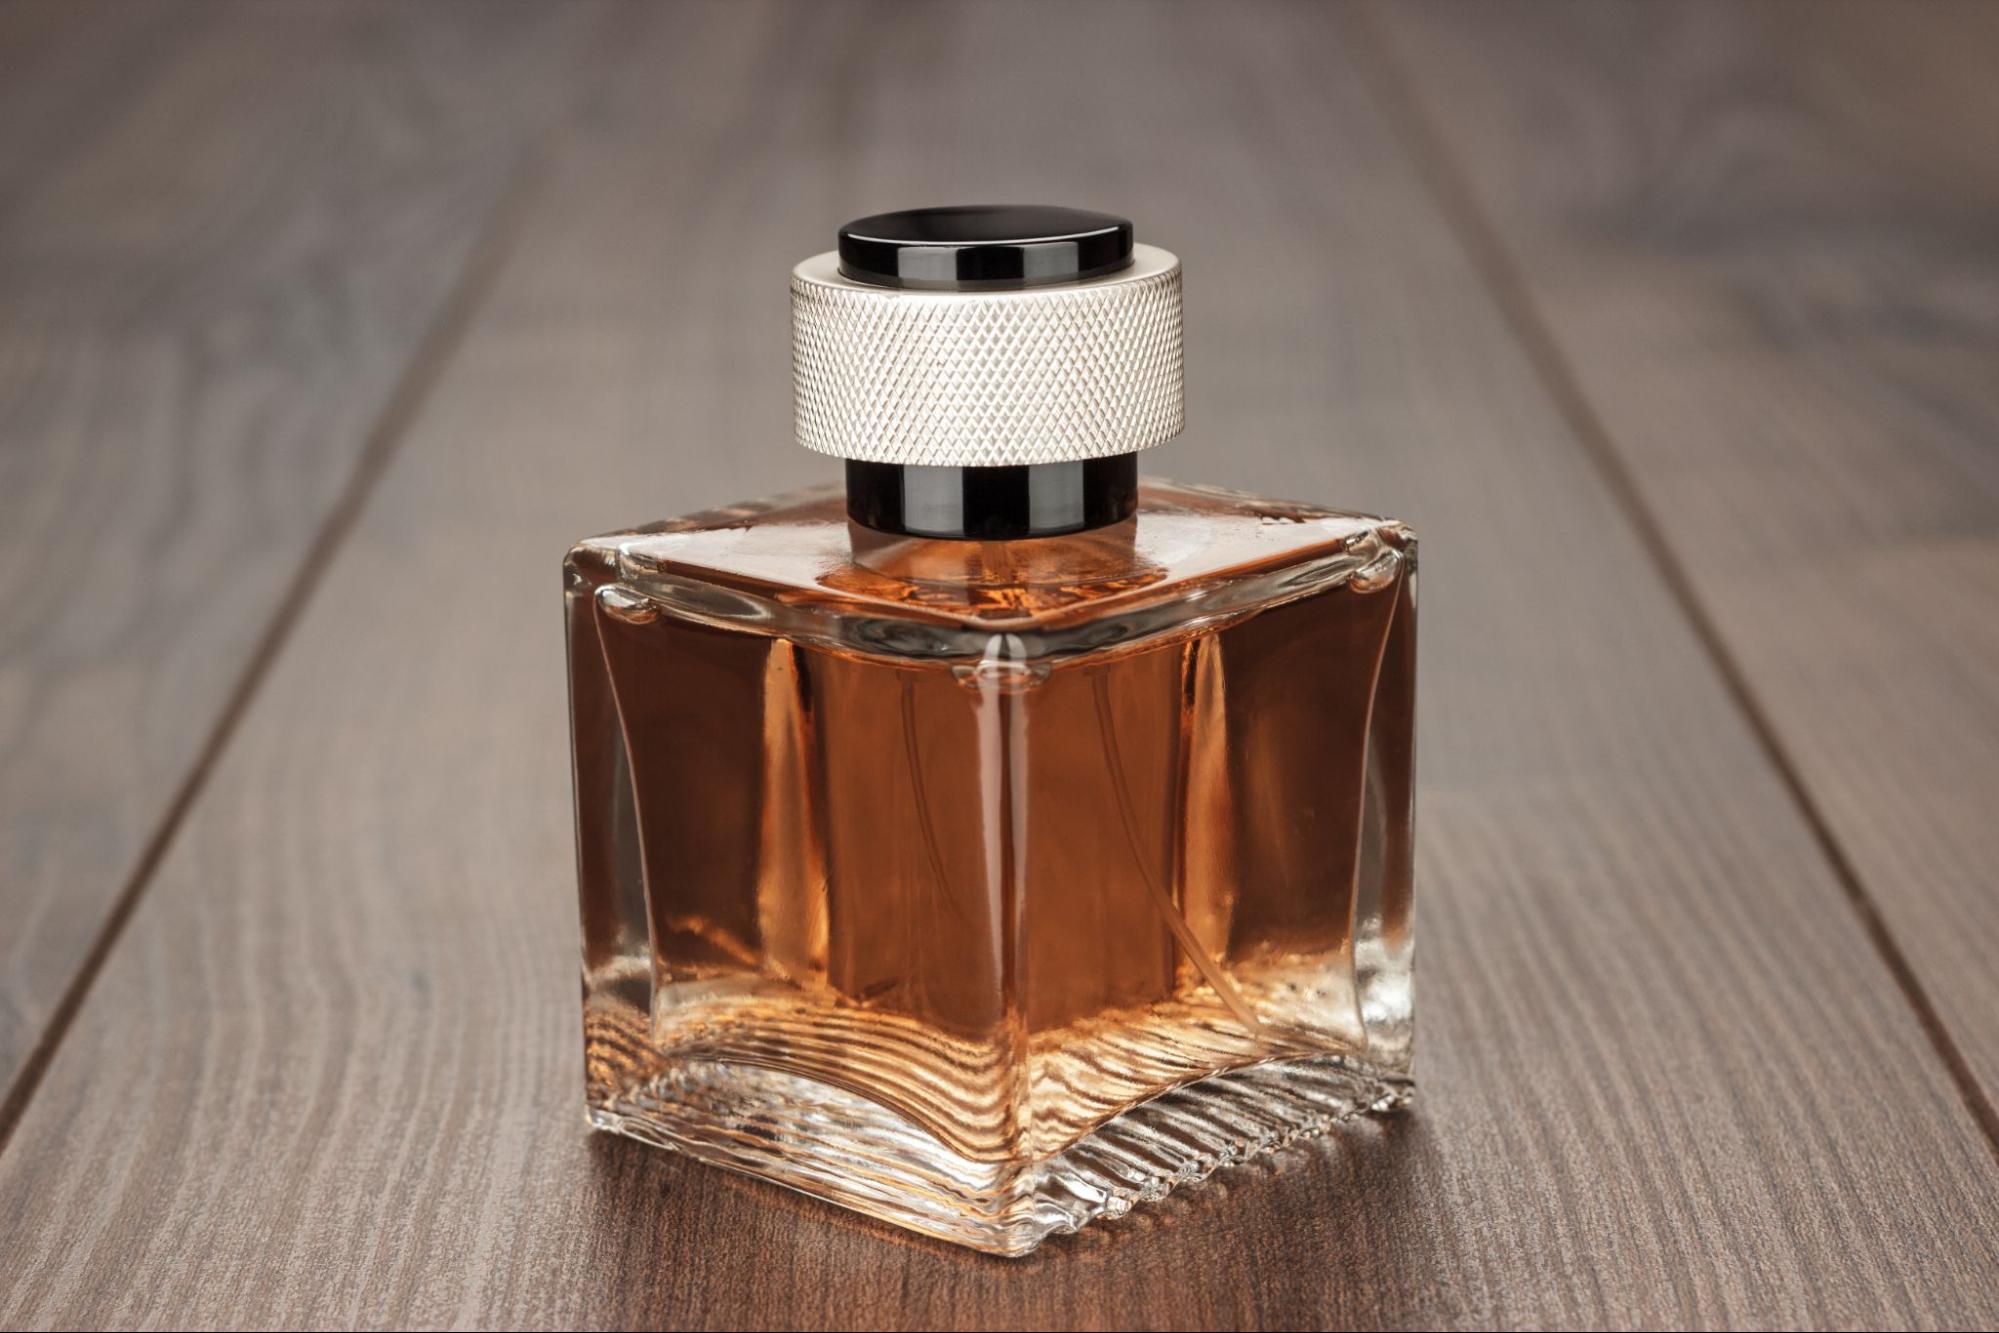 The best grownup gourmand scents for sweet perfume lovers